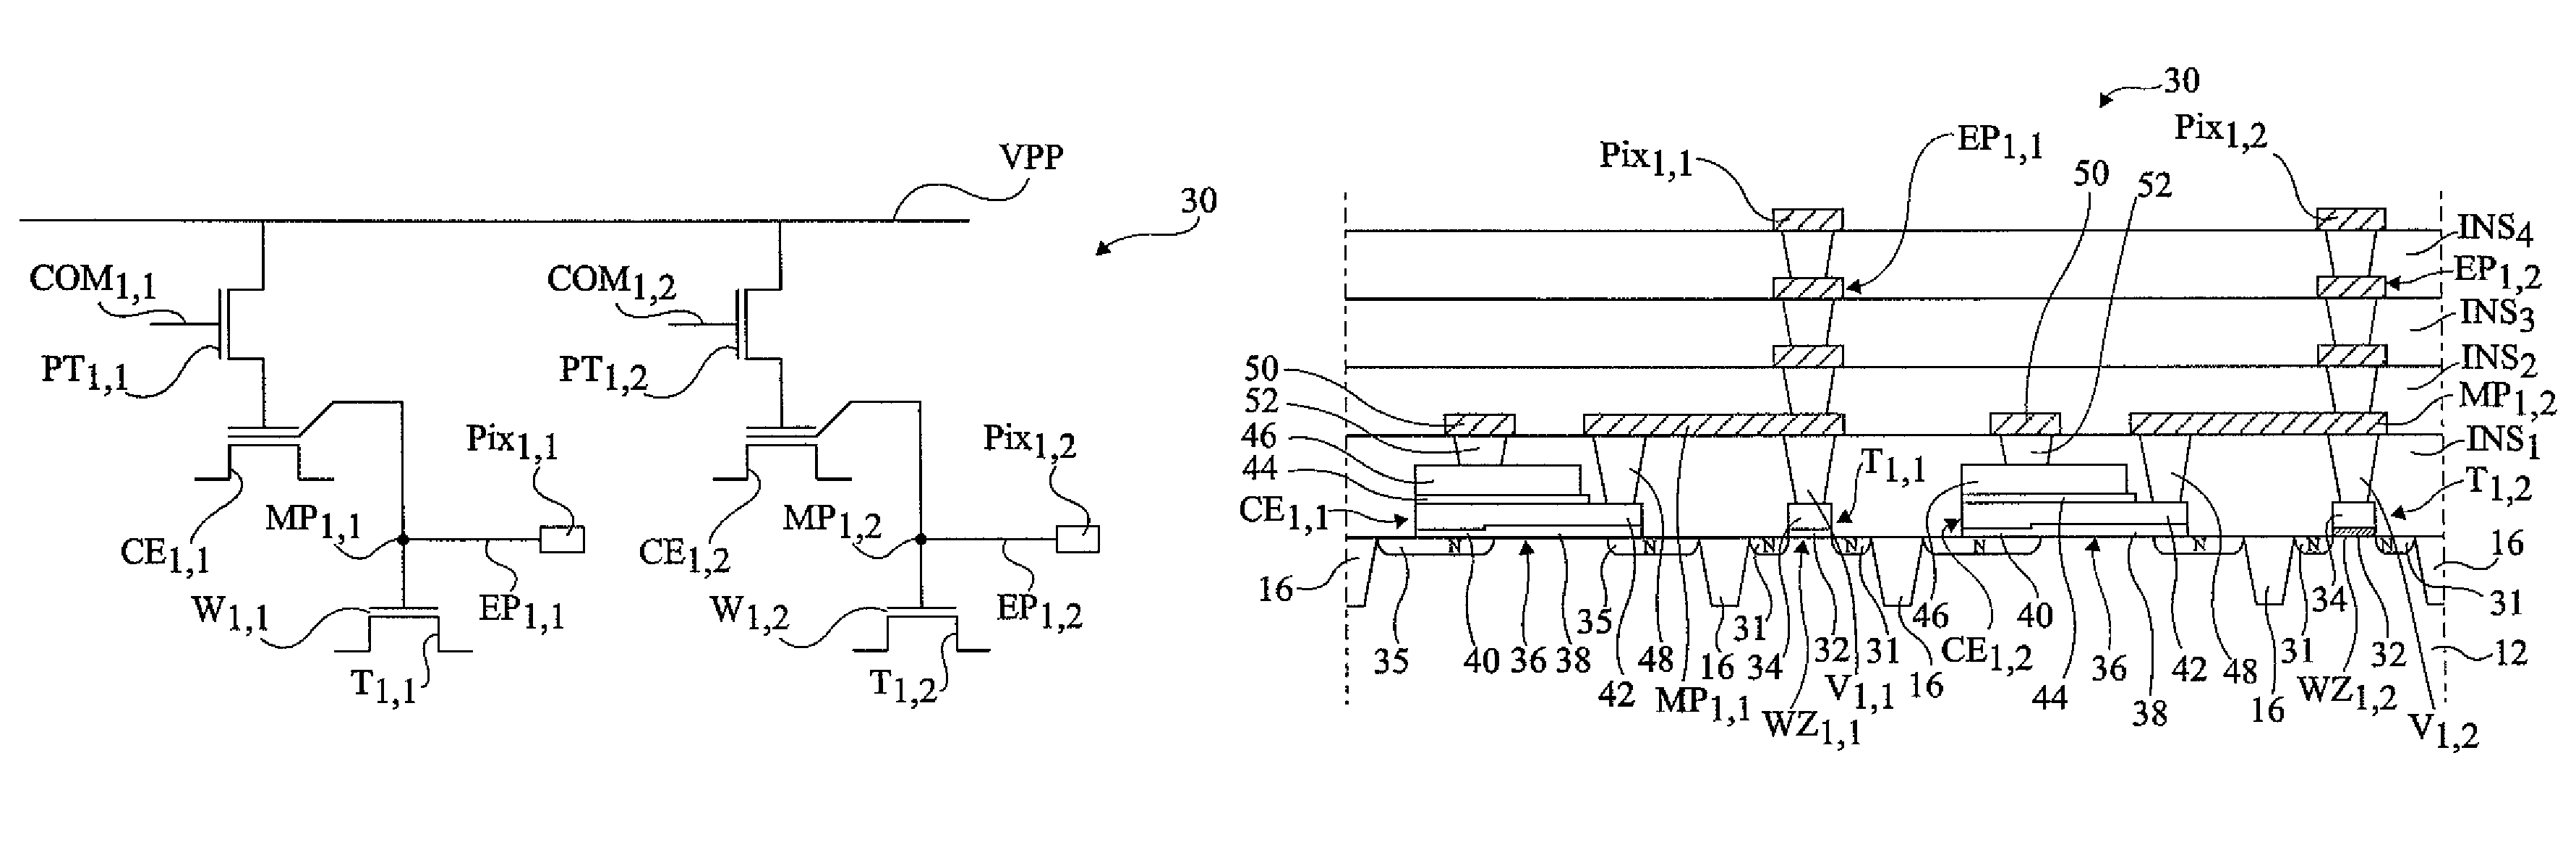 Storage of an image in an integrated circuit